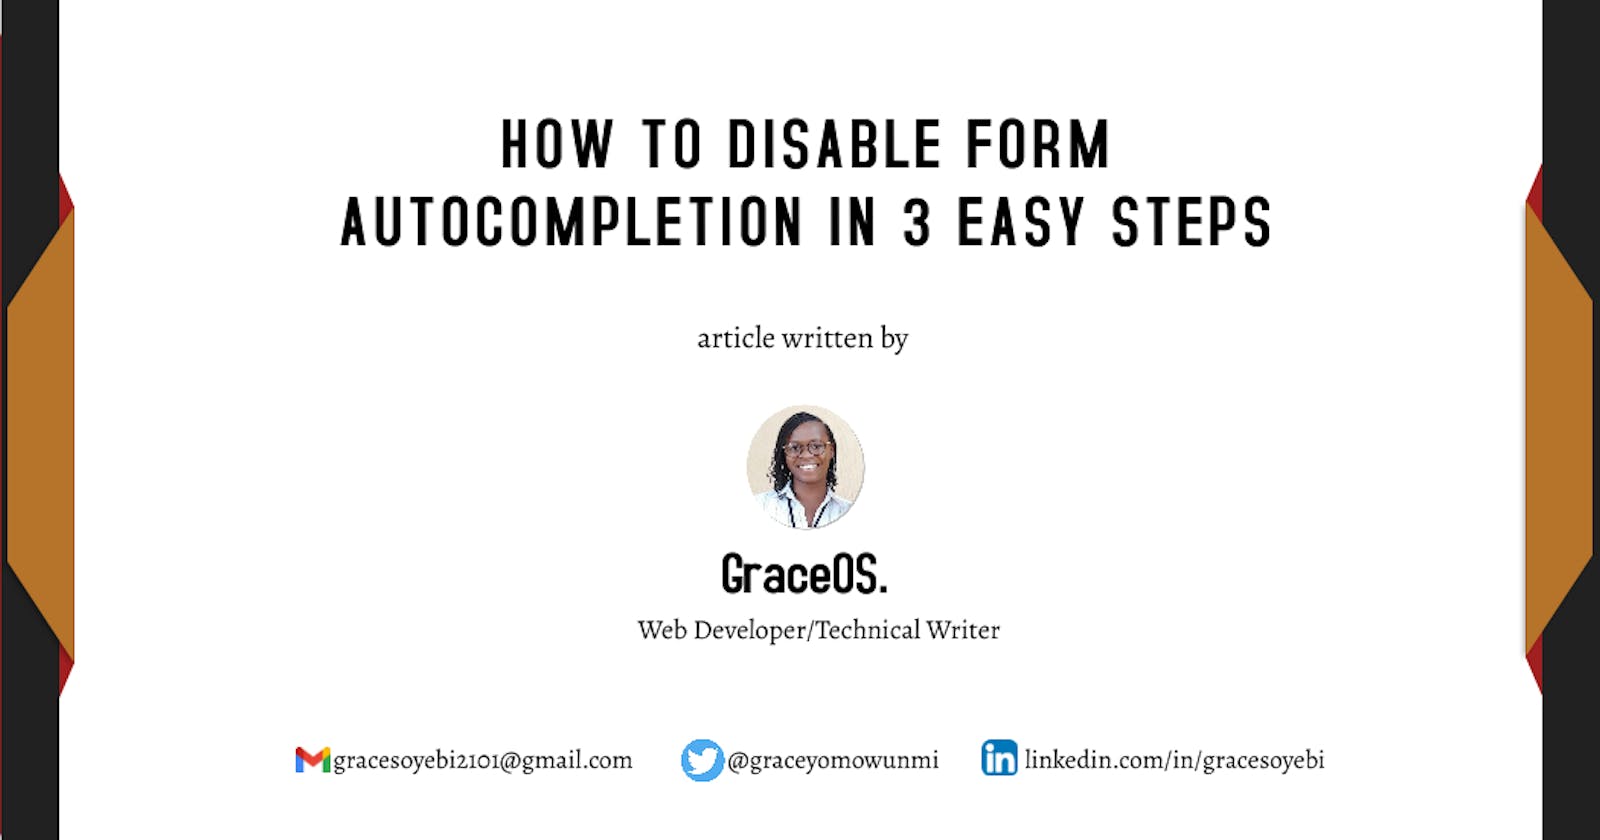 How To Disable Form Autocompletion In 3 Easy Steps!